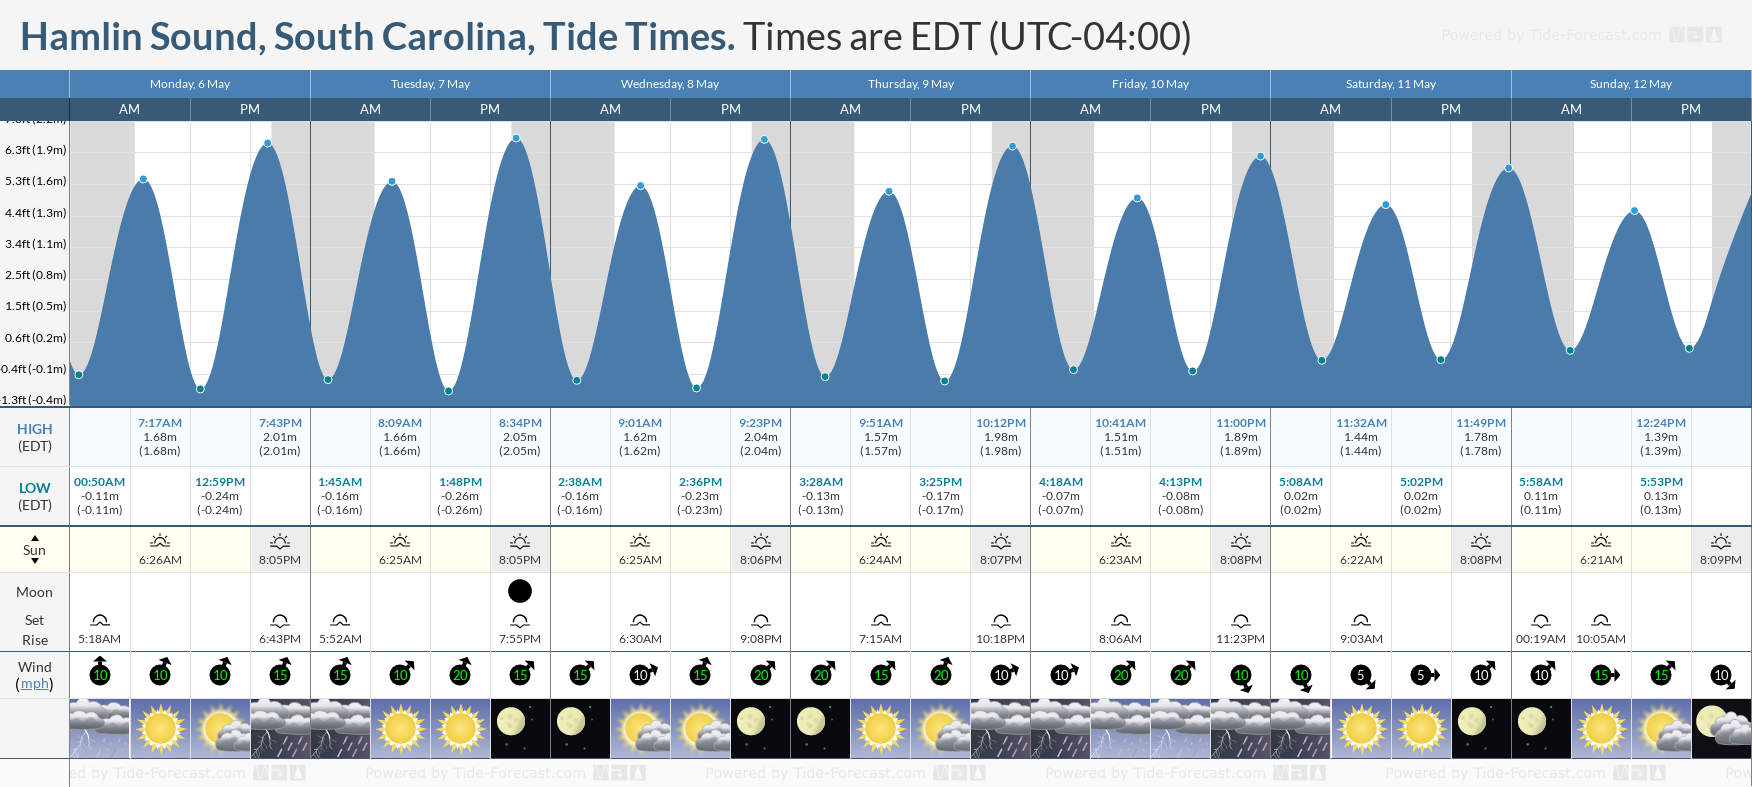 Hamlin Sound, South Carolina Tide Chart including high and low tide tide times for the next 7 days